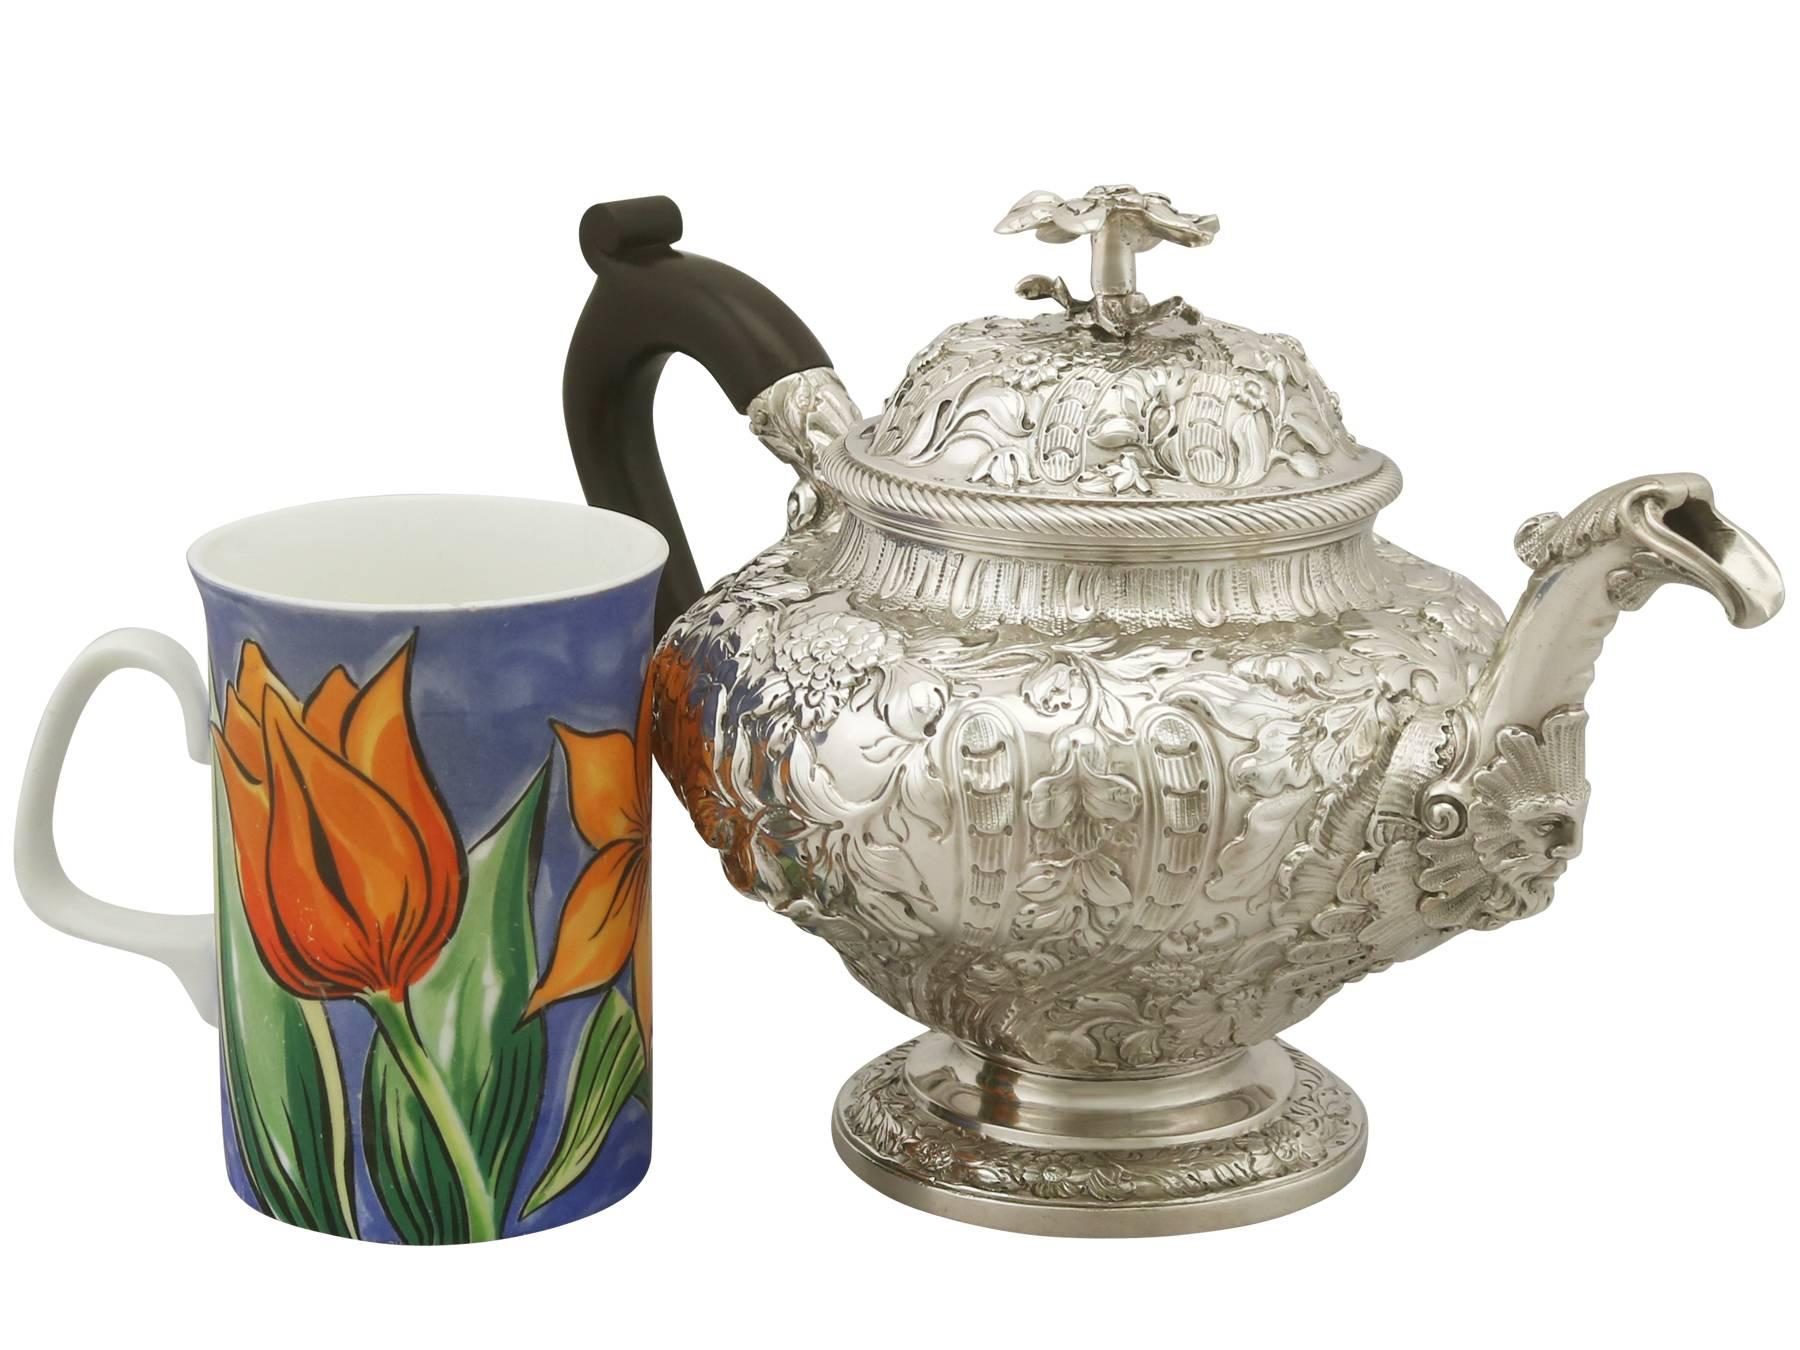 An exceptional, fine and impressive antique George III English sterling silver teapot; an addition to our Georgian silver teaware collection.

This exceptional antique George III English sterling silver teapot has a circular rounded form onto a